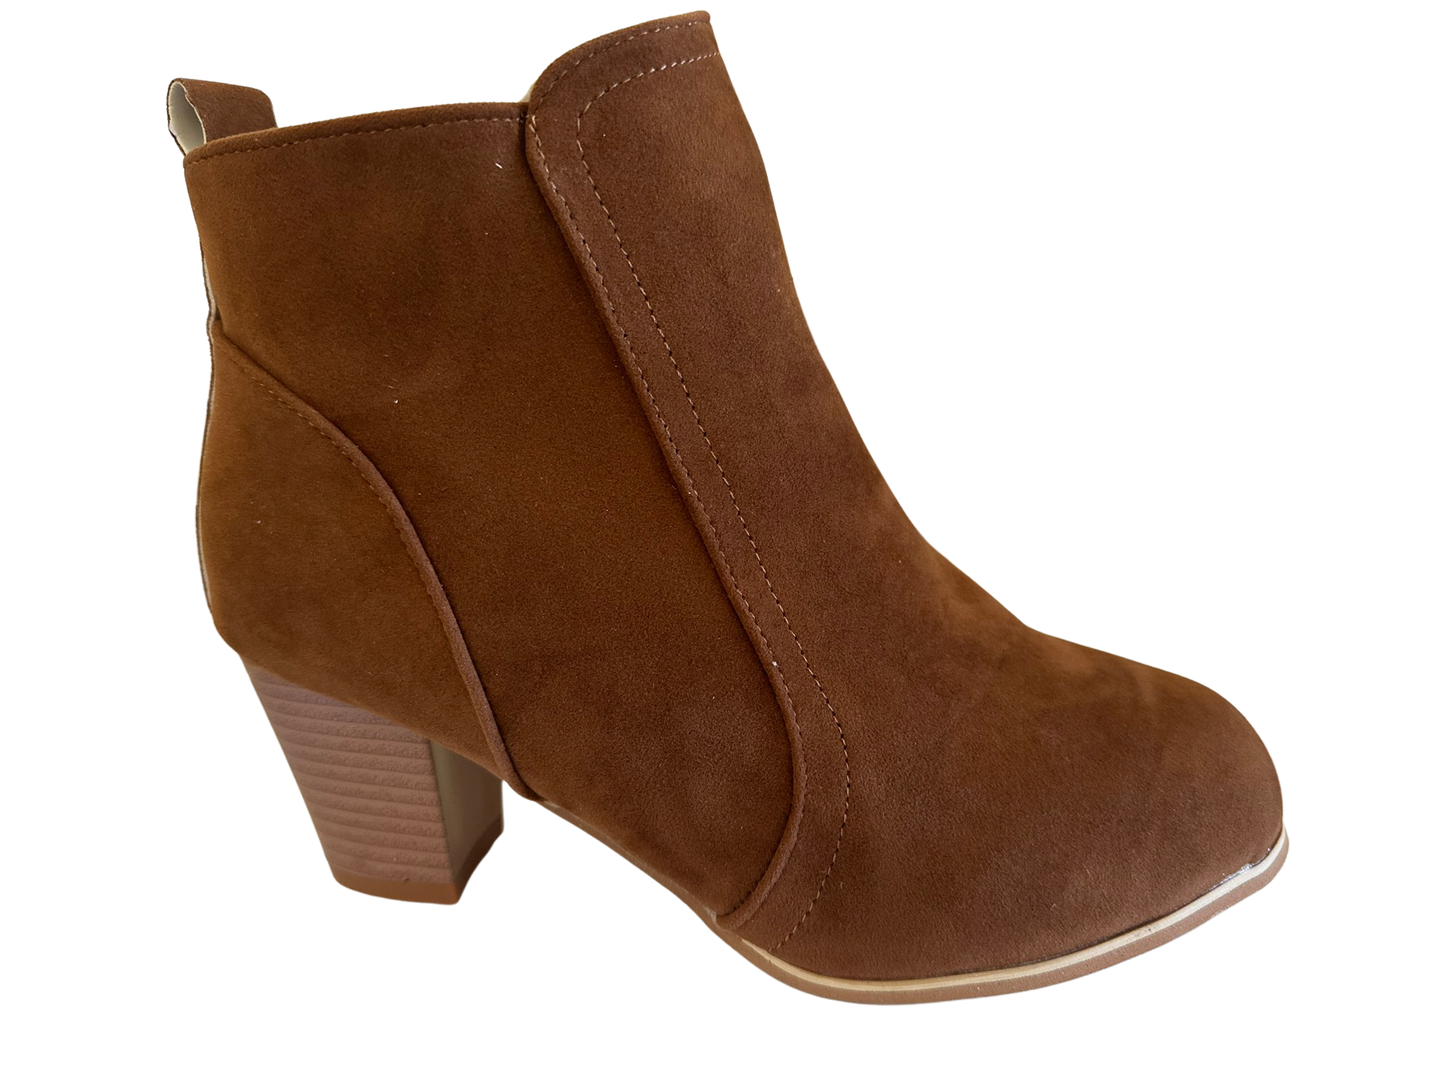 Brown/Tan Faux Suede Ankle Boots